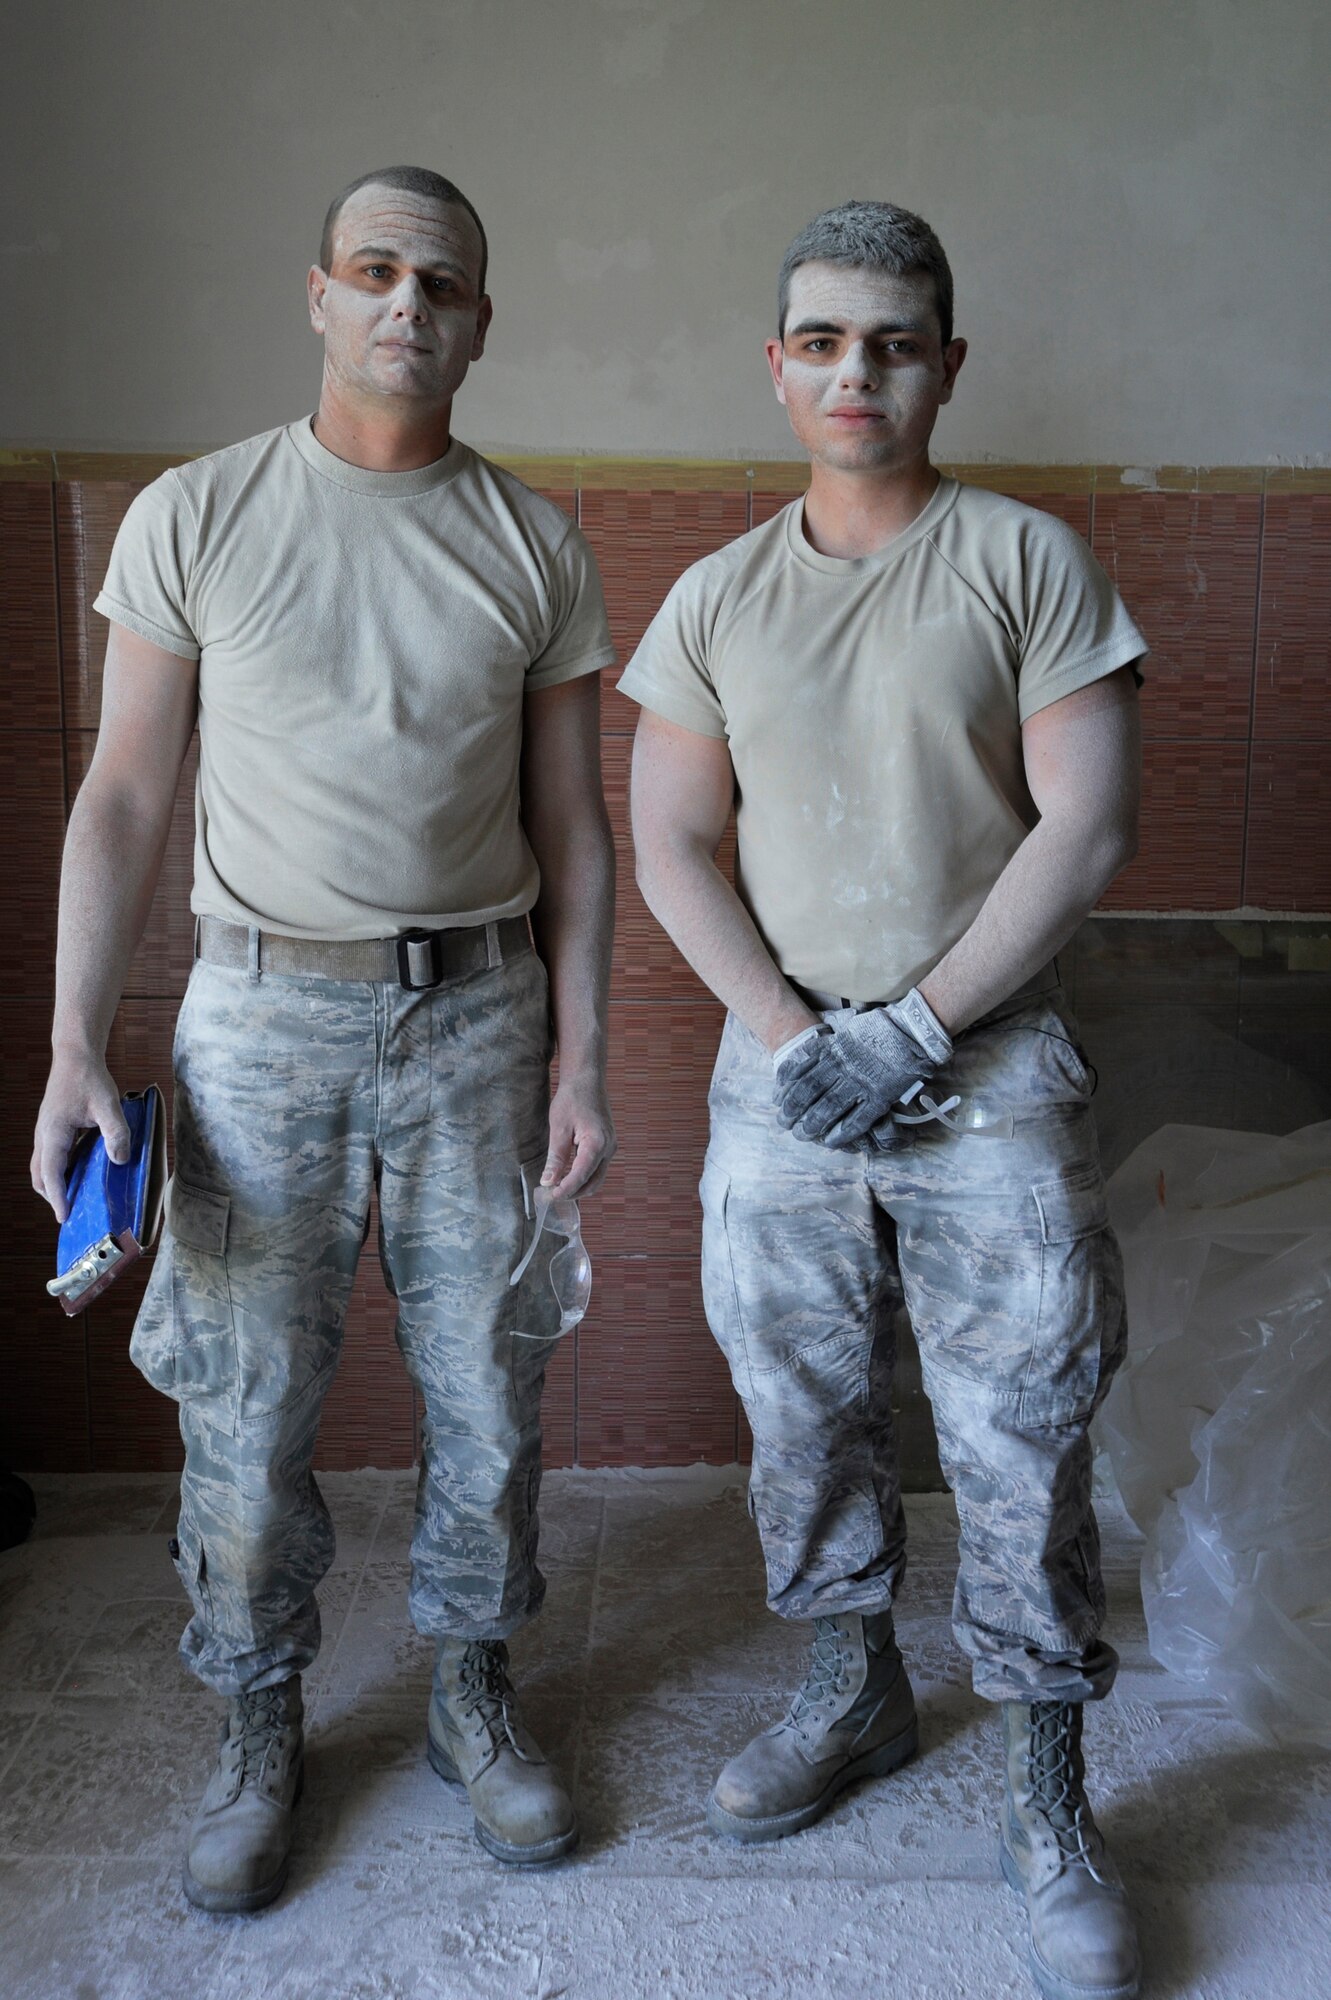 Oregon Air National Guardsmen Senior Airmen Daniel Hagemier, left, and Dustin Sevilla, right, both assigned to the 142nd Fighter Wing Civil Engineer Sqauadron, pause briefly for a photograph together after sanding plaster in a clinic treatment room at a medical being repaired in the city of Mangalia, Romania, May 13, 2015, as part of the U.S. European Command’s (EUCOM) Humanitarian Civic Assistance Program (HCA). The EUCOM HCA program is designed to improve the host nation's critical infrastructure and the underlying living conditions of the civilian populace. (U.S. Air National Guard photo by Tech. Sgt. John Hughel, 142nd Fighter Wing Public Affairs/Released)